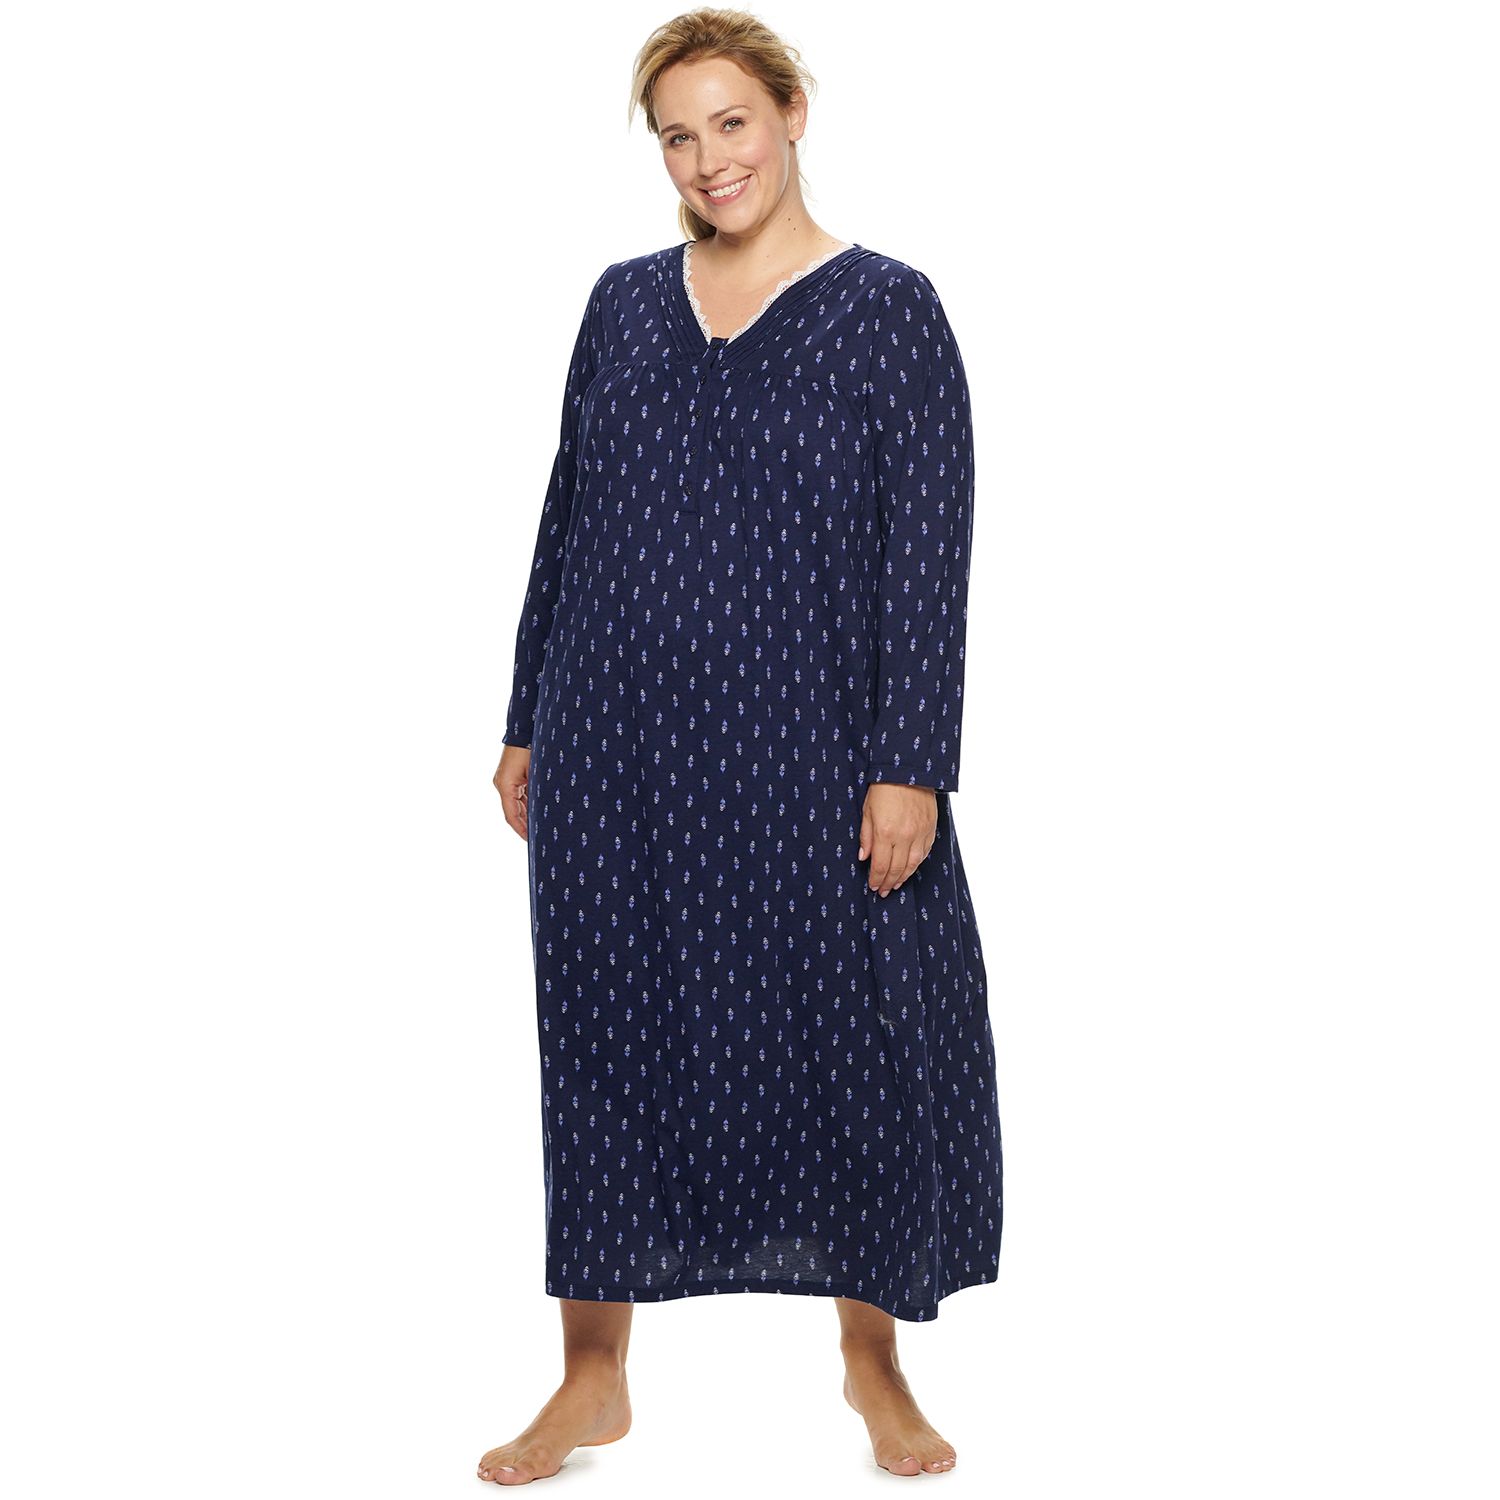 Find Women's Plus Size Nightgowns for a ...